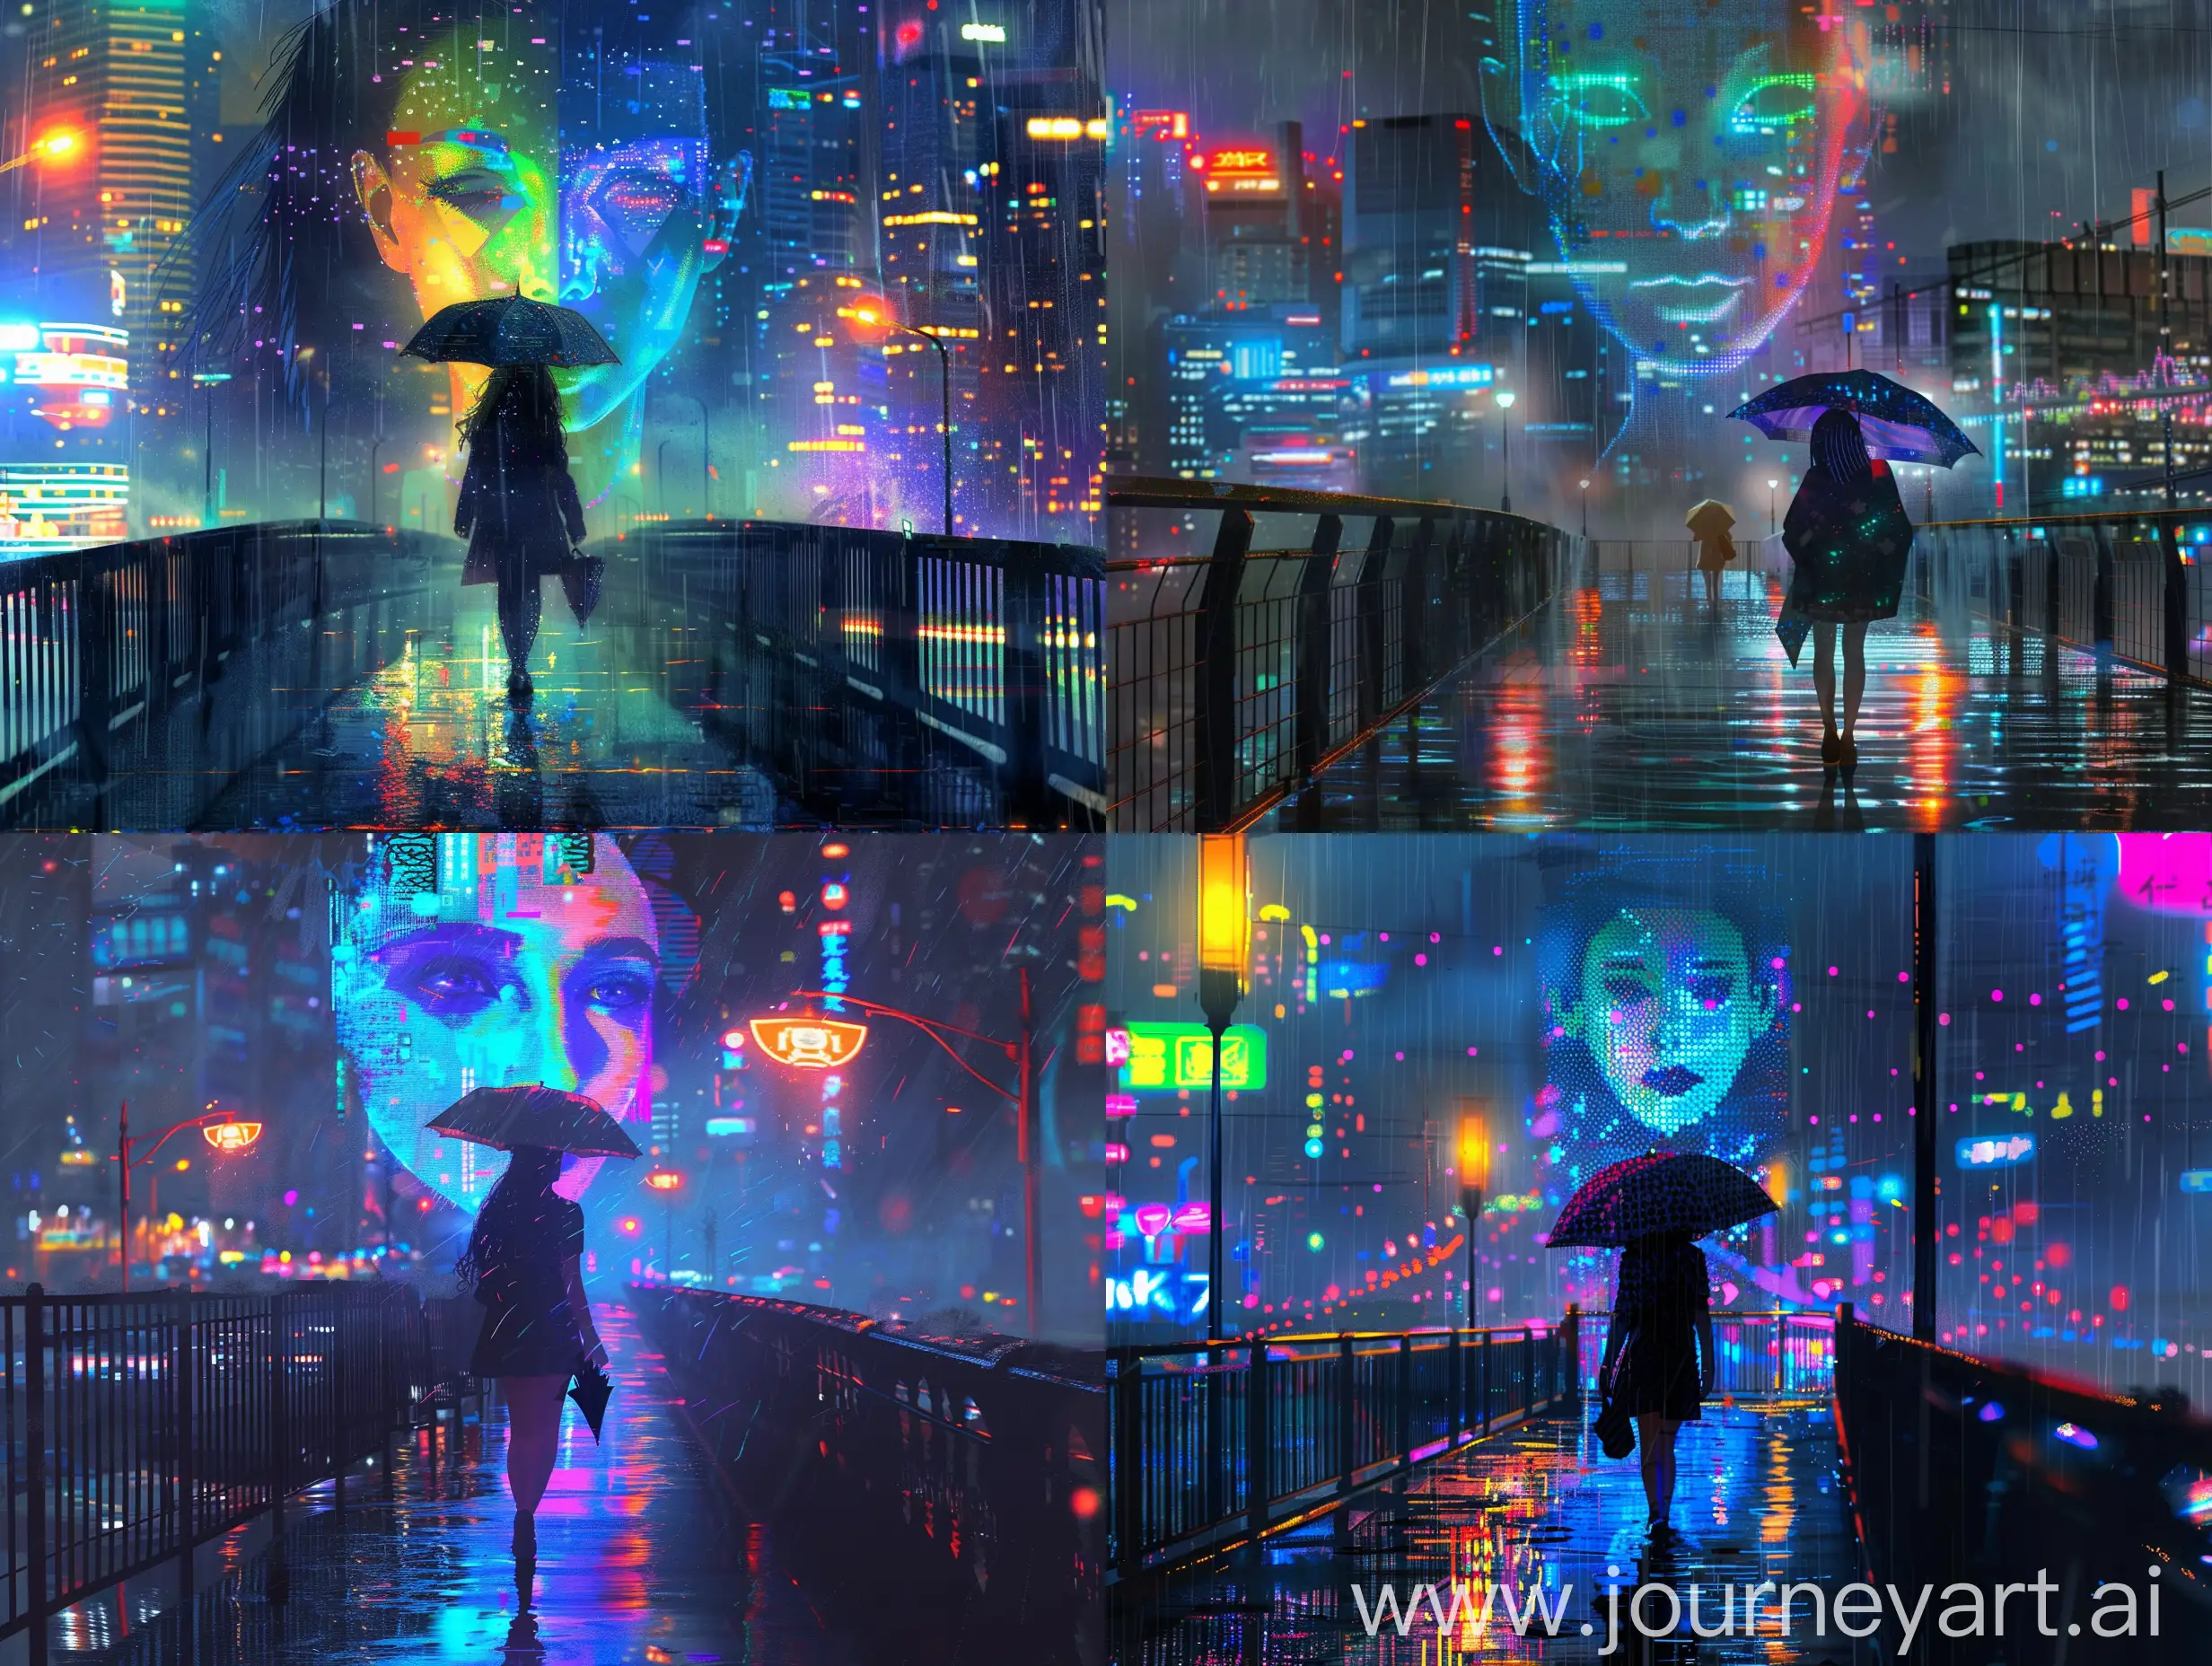 A girl walks on a bridge at night in the rain, holding an umbrella, with colorful city lights and a holographic face in the background, cyberpunk, moody